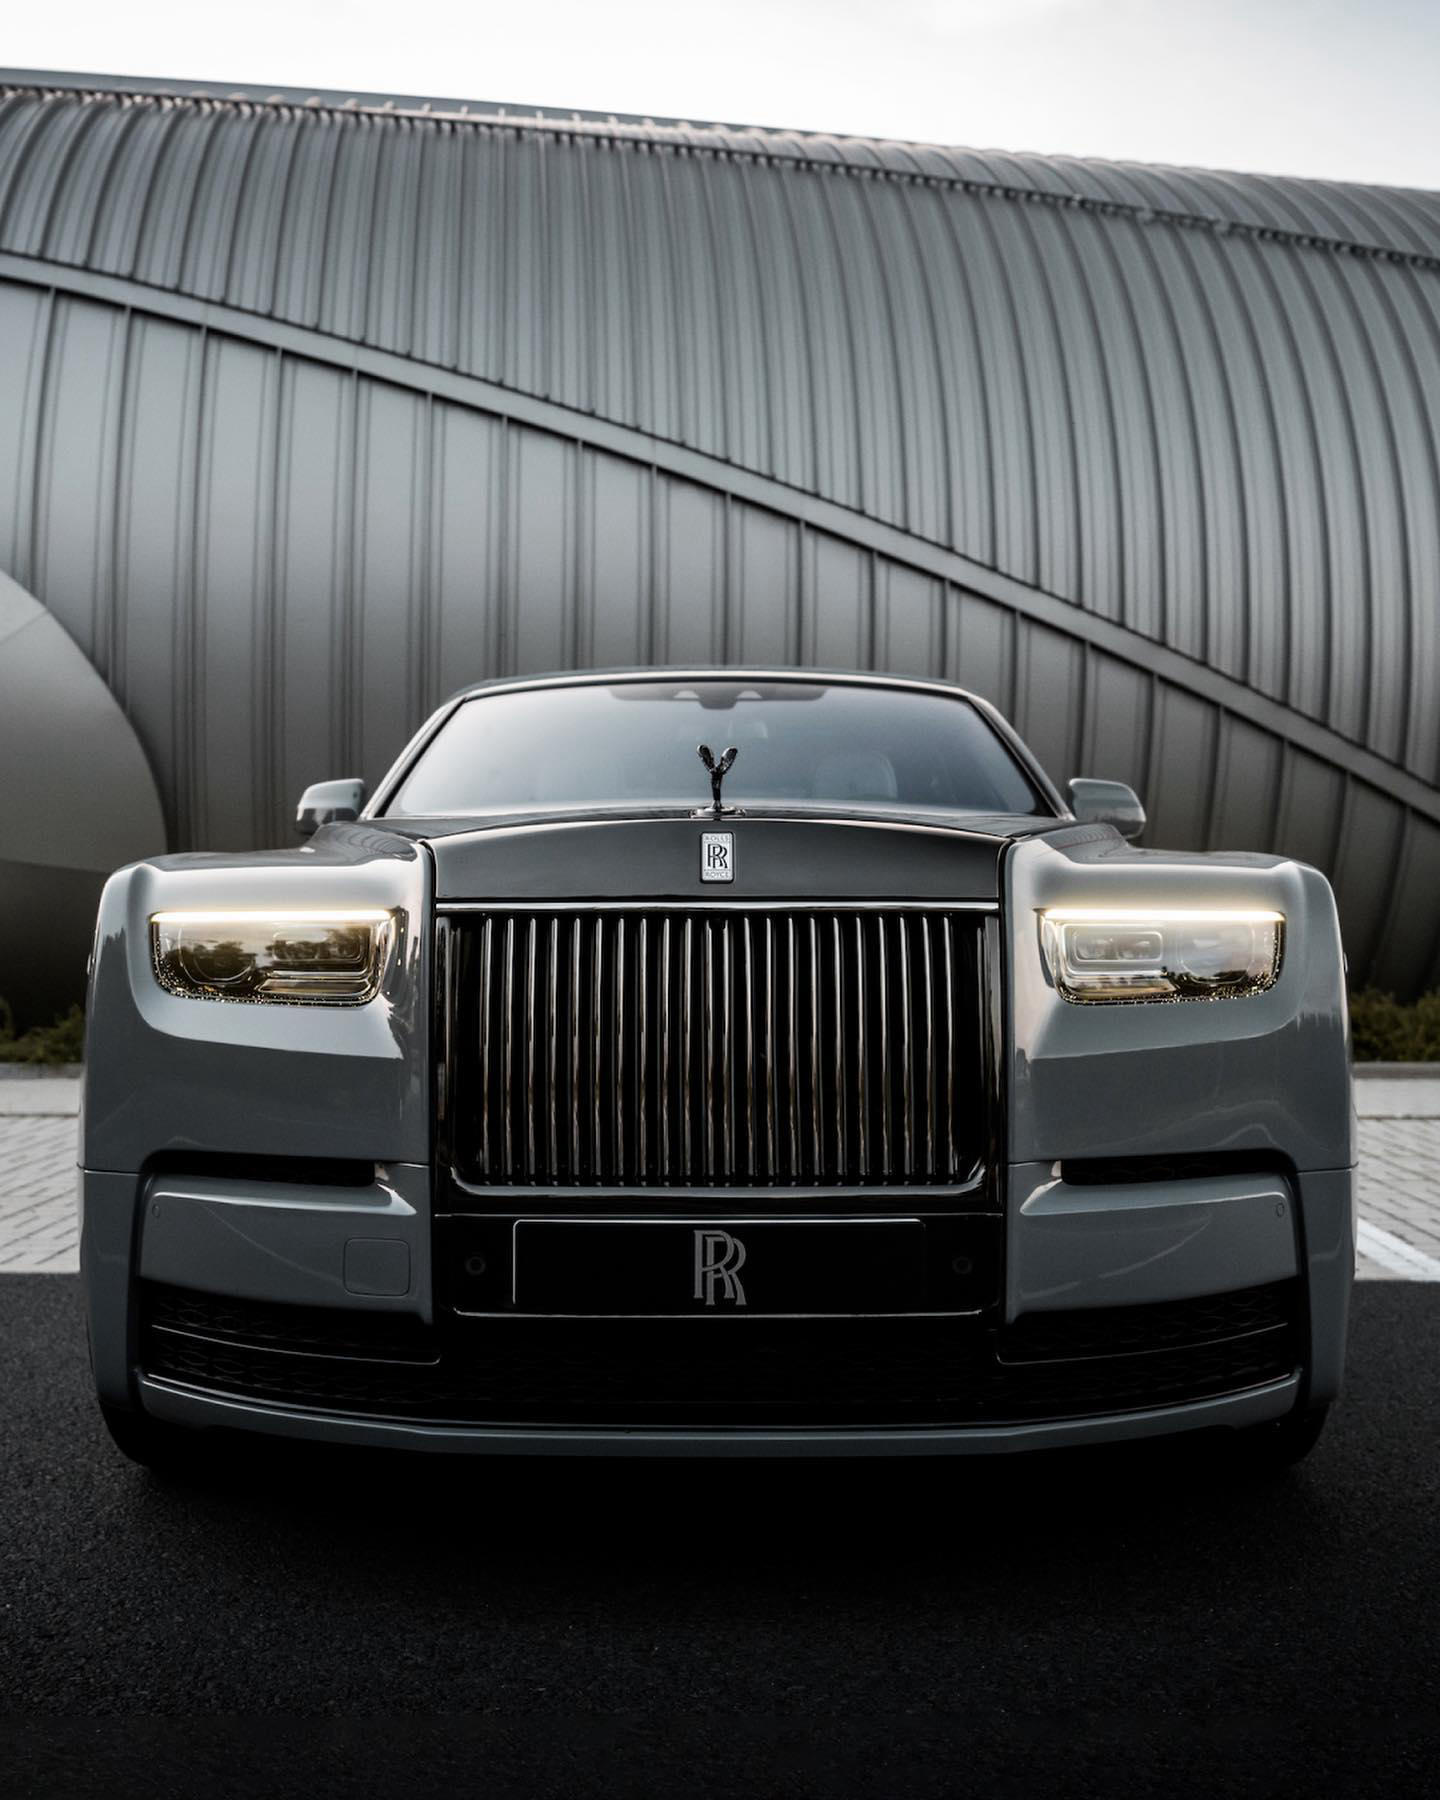 The Illuminated Grille’s imposing lines bestow Phantom Series II with a commanding facade — one befi